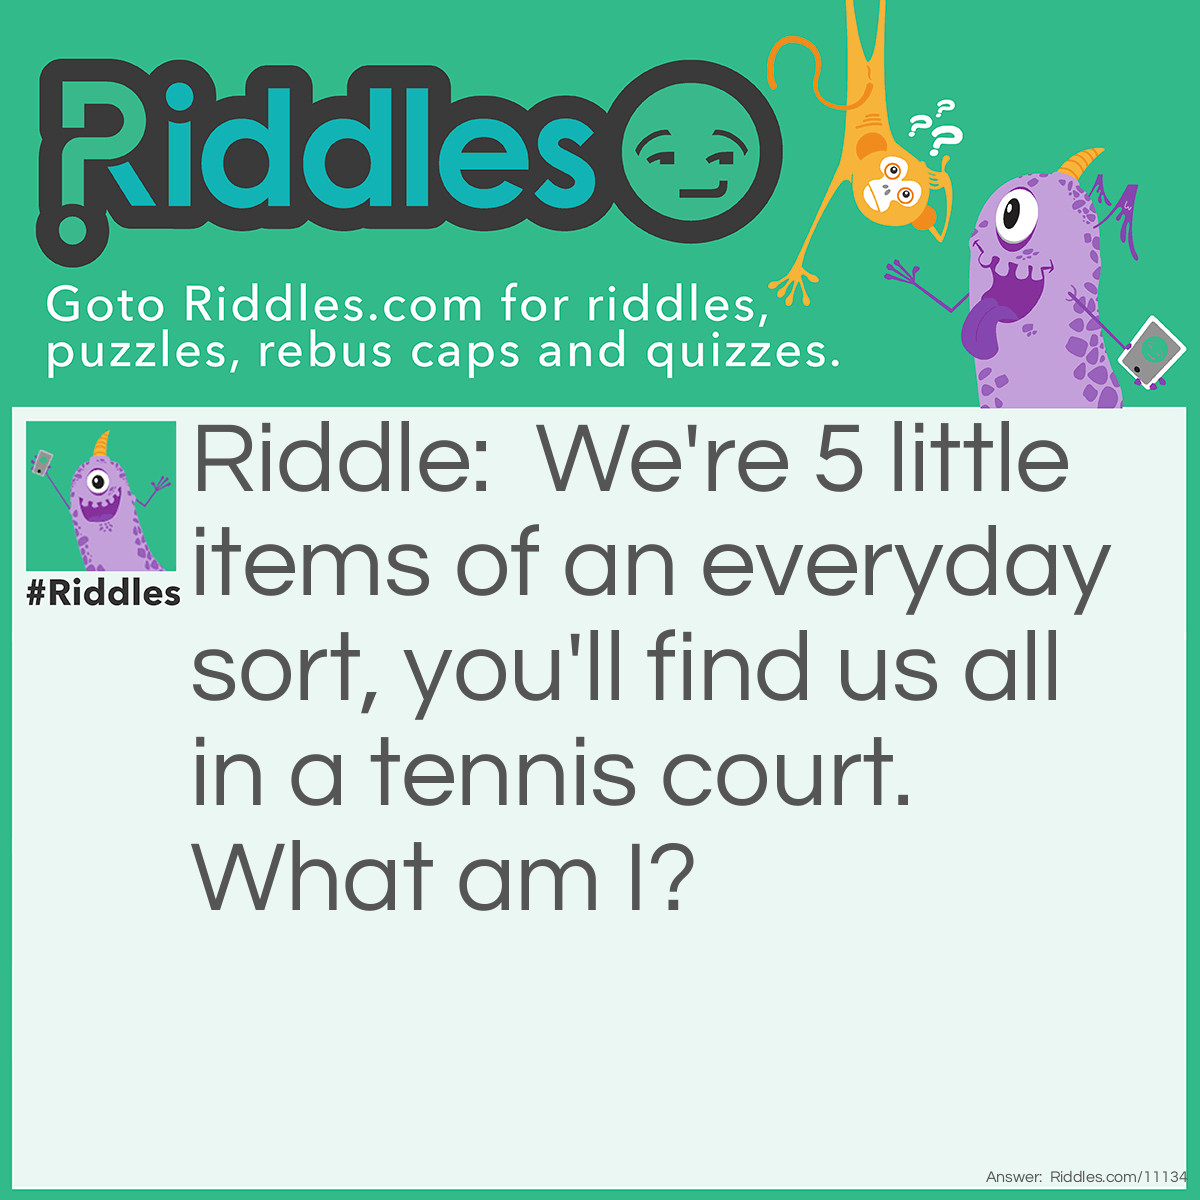 Riddle: We're 5 little items of an everyday sort, you'll find us all in a tennis court. What am I? Answer: Vowels.